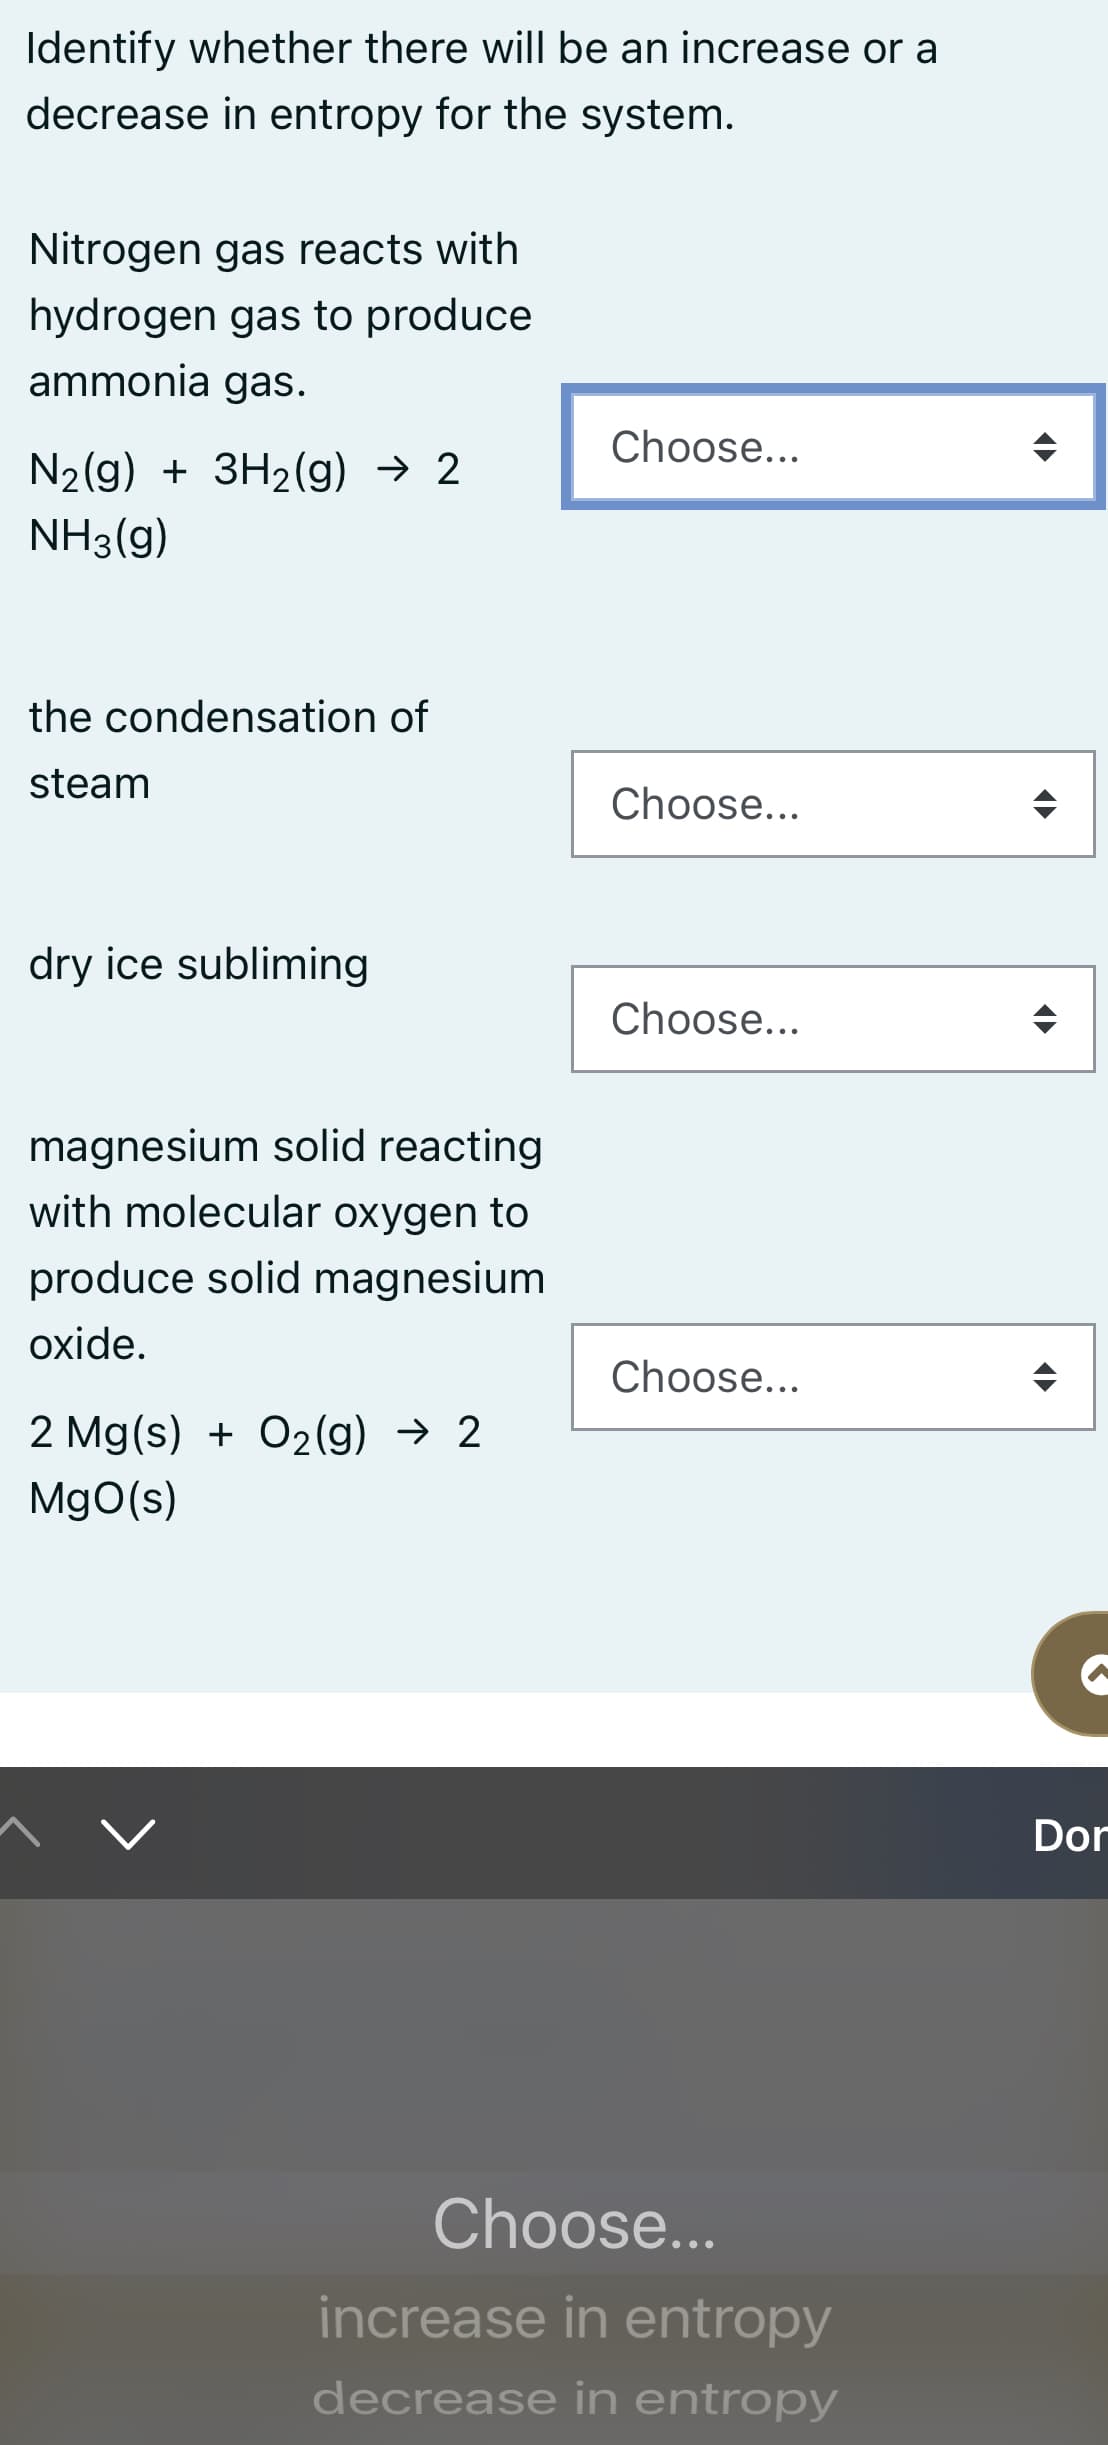 Identify whether there will be an increase or a
decrease in entropy for the system.
Nitrogen gas reacts with
hydrogen gas to produce
ammonia gas.
Choose...
N2(g) + 3H2(g) → 2
NH3(g)
the condensation of
steam
Choose...
dry ice subliming
Choose...
magnesium solid reacting
with molecular oxygen to
produce solid magnesium
oxide.
Choose...
2 Mg(s) + O2(g) → 2
MgO(s)
Dor
Choose...
increase in entropy
decrease in entropy
